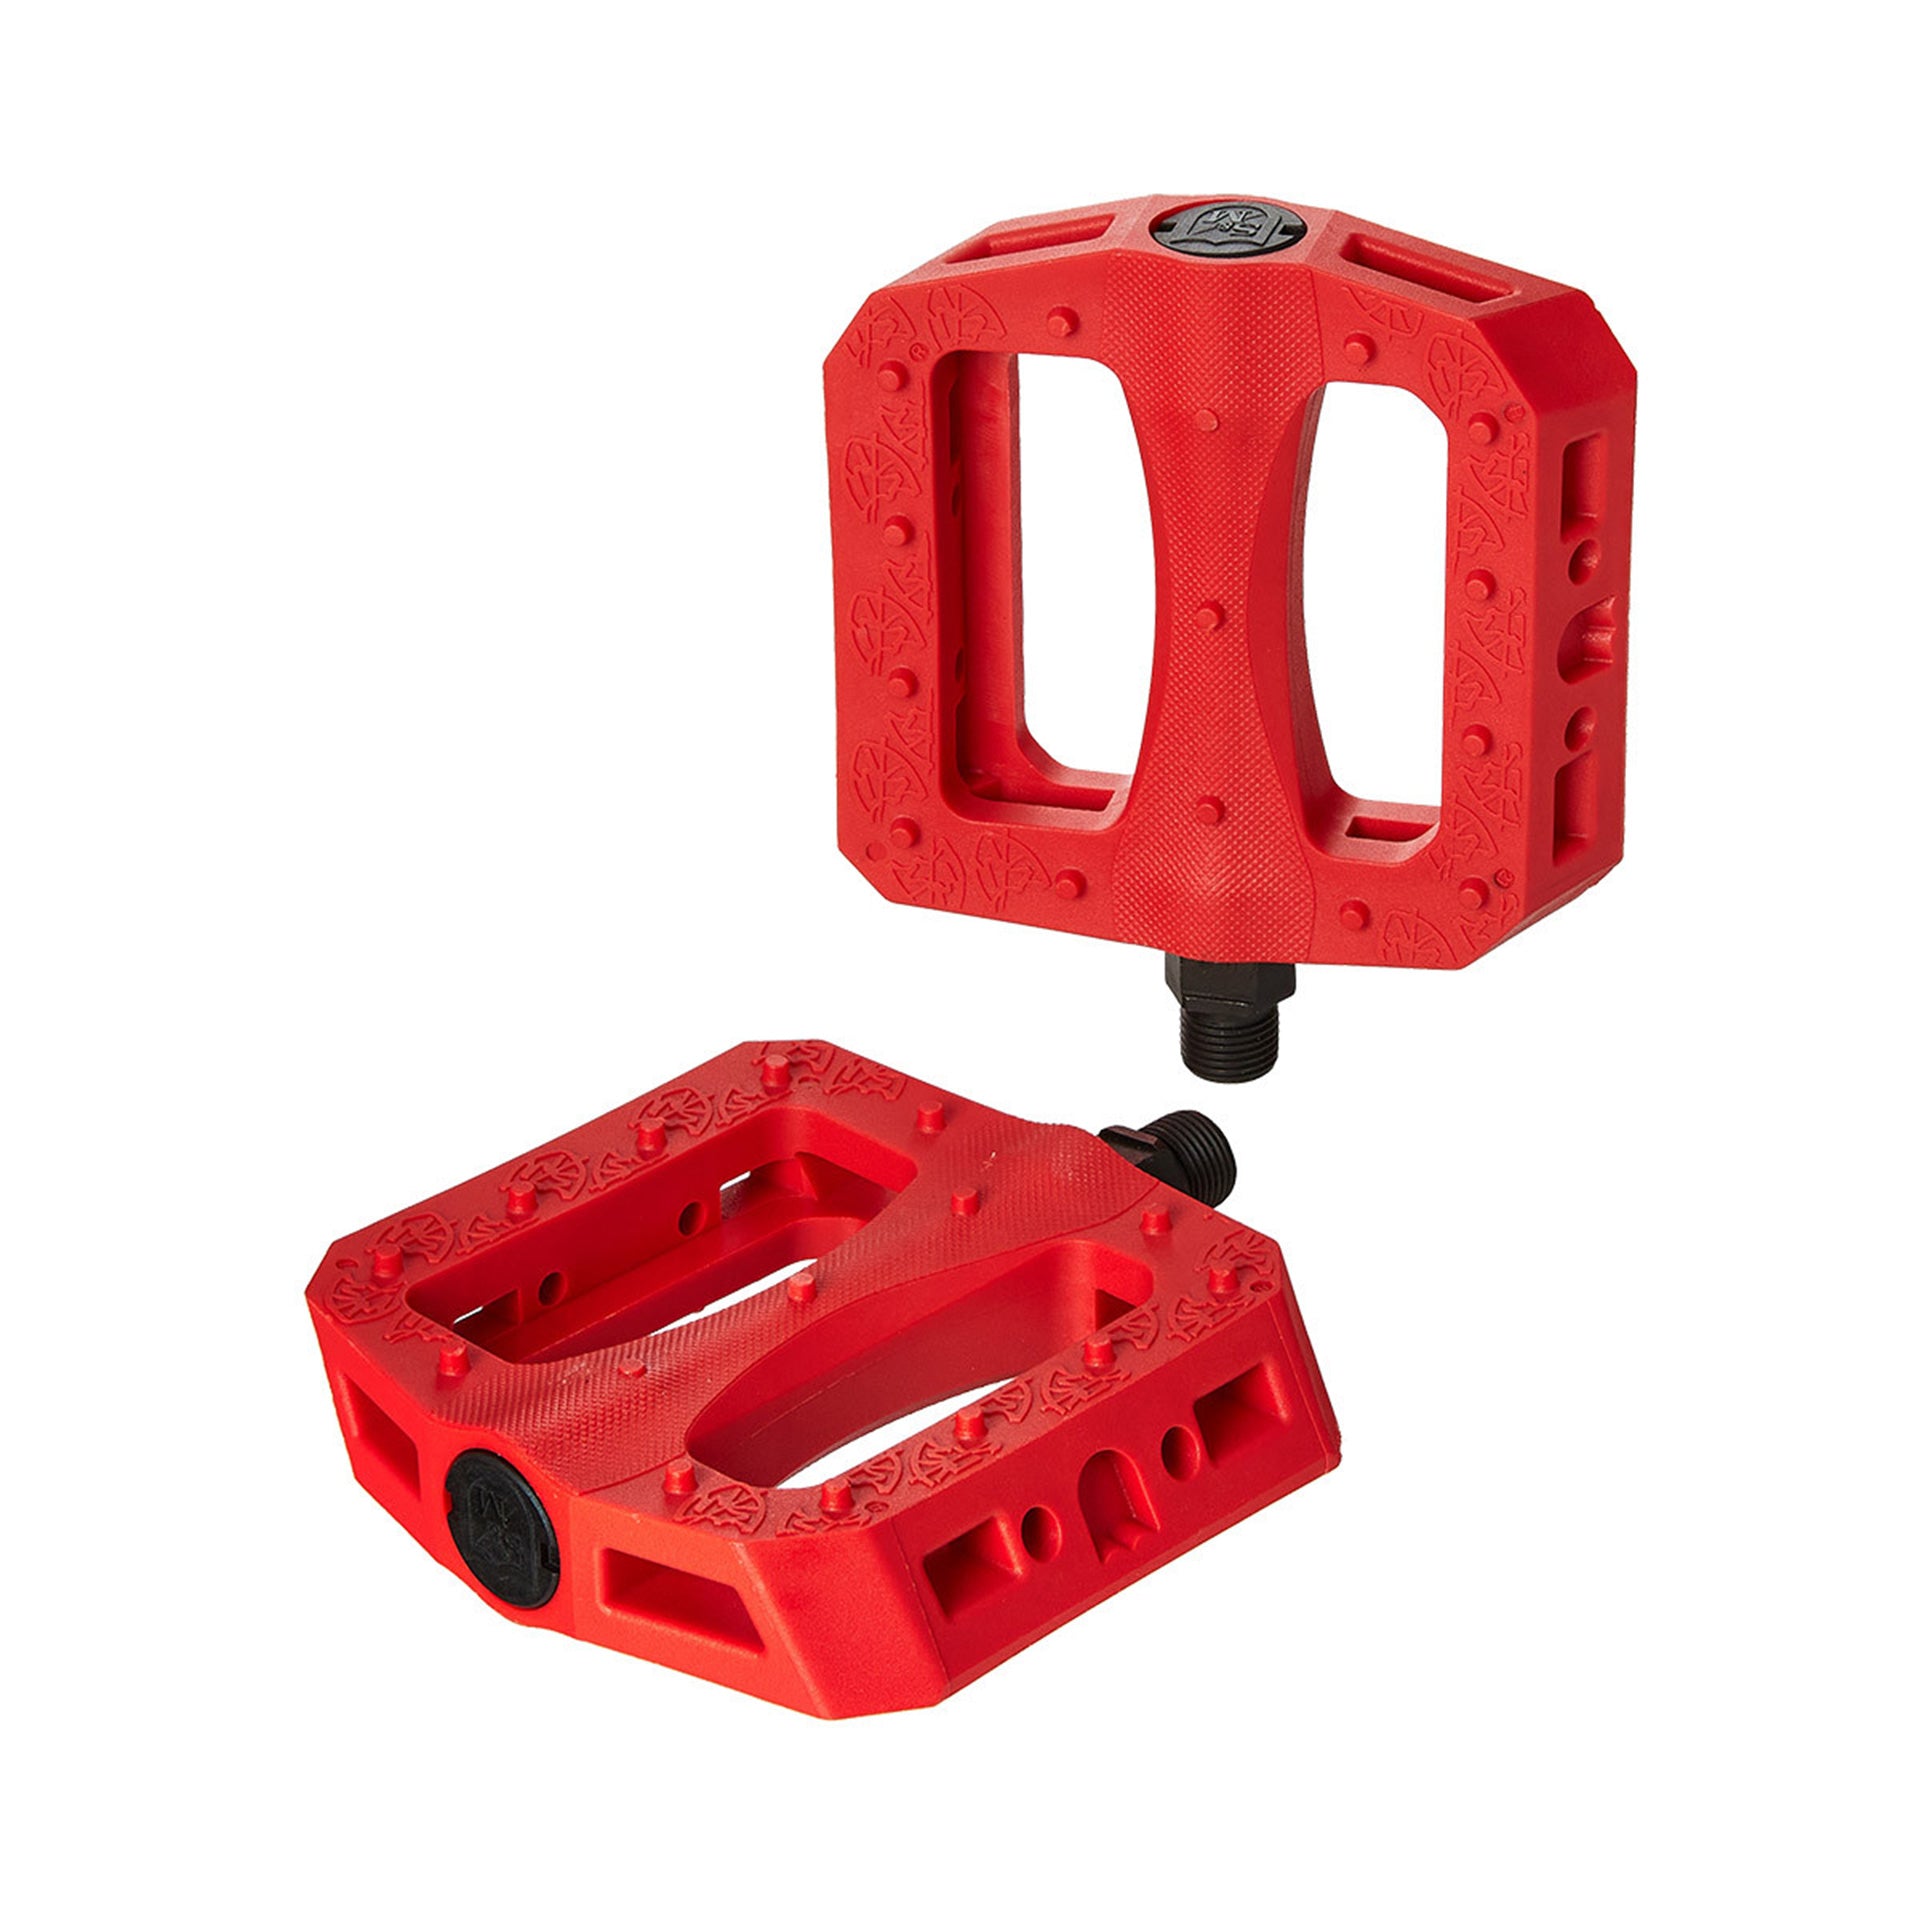 S&M Hoder BTM Pedals-Red at J&R Bicycles – J&R Bicycles, Inc.